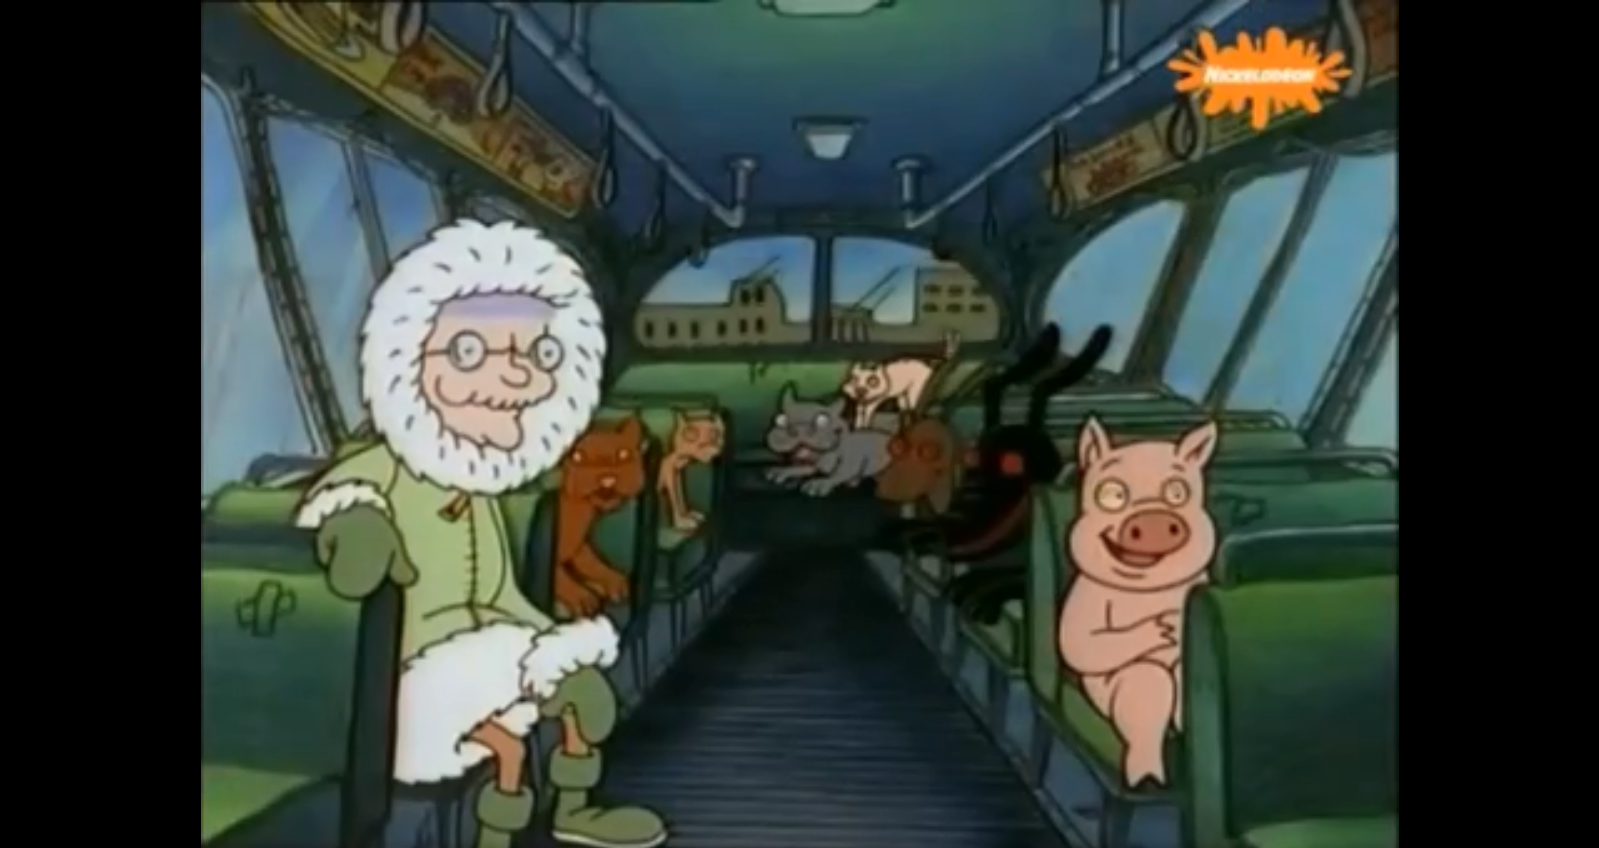 That feeling when you get on a minibus in an unfamiliar area - Hey, Arnold, Minibus, Cartoons, Comics, Road, Interesting, Humor